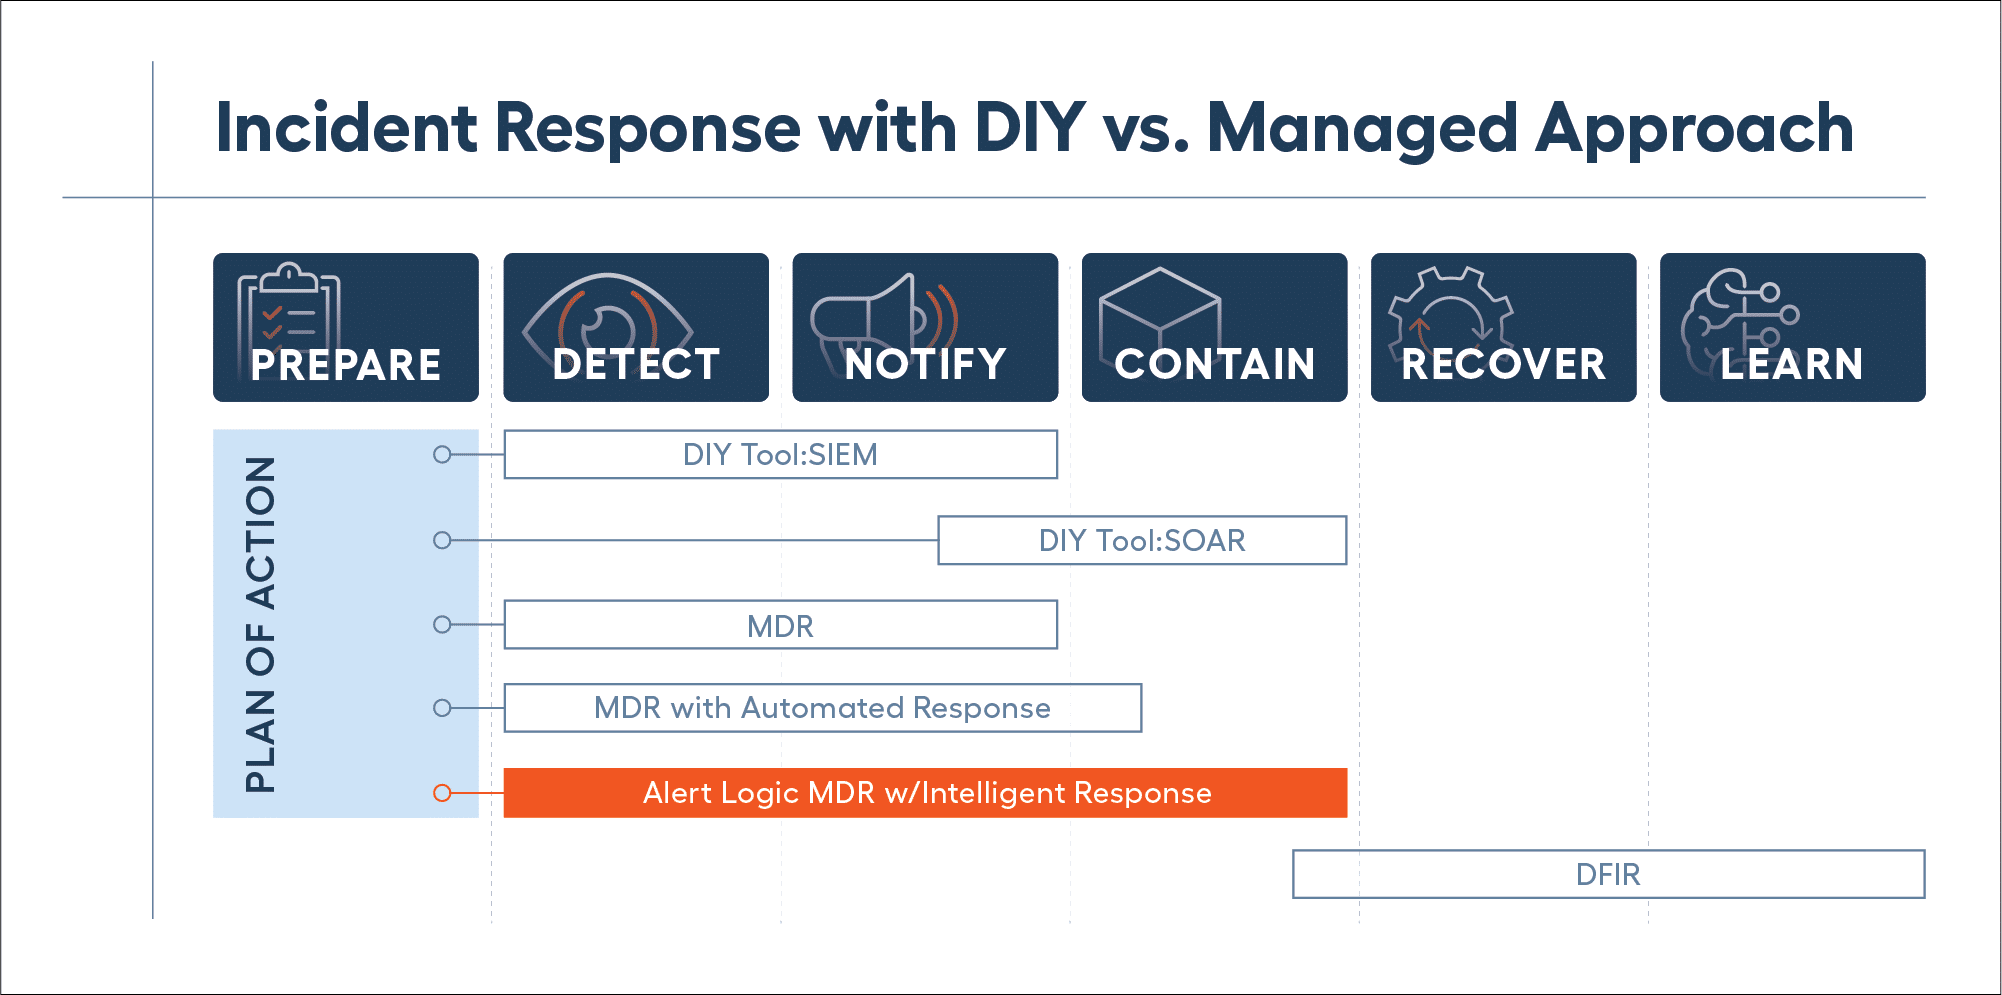 Incident Response with DIY vs. Managed Approach